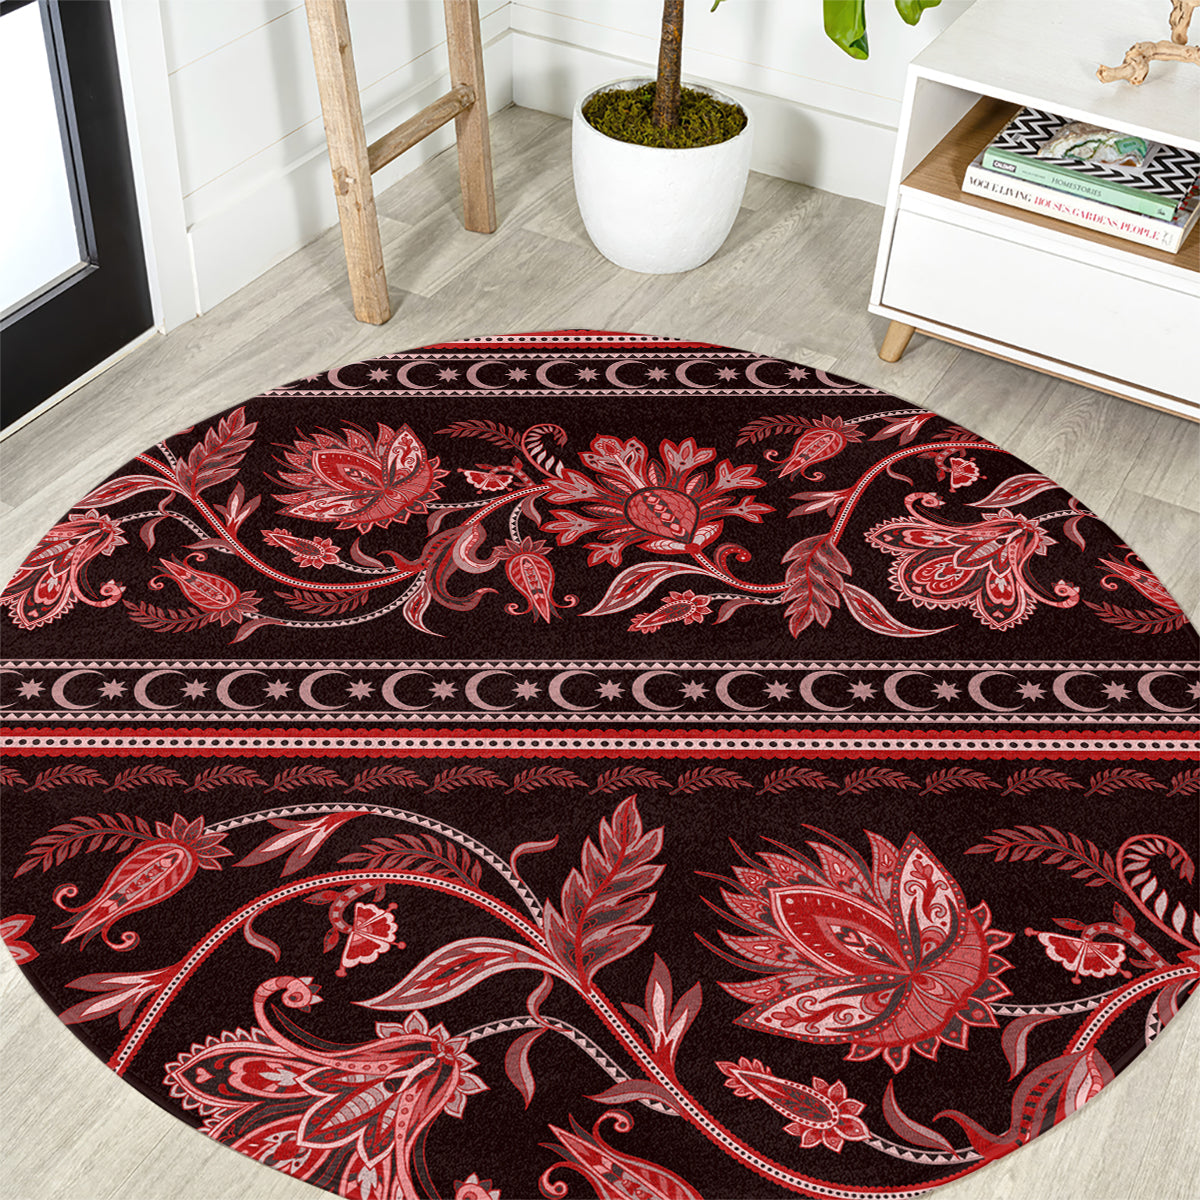 azerbaijan-round-carpet-traditional-pattern-ornament-with-flowers-buta-red